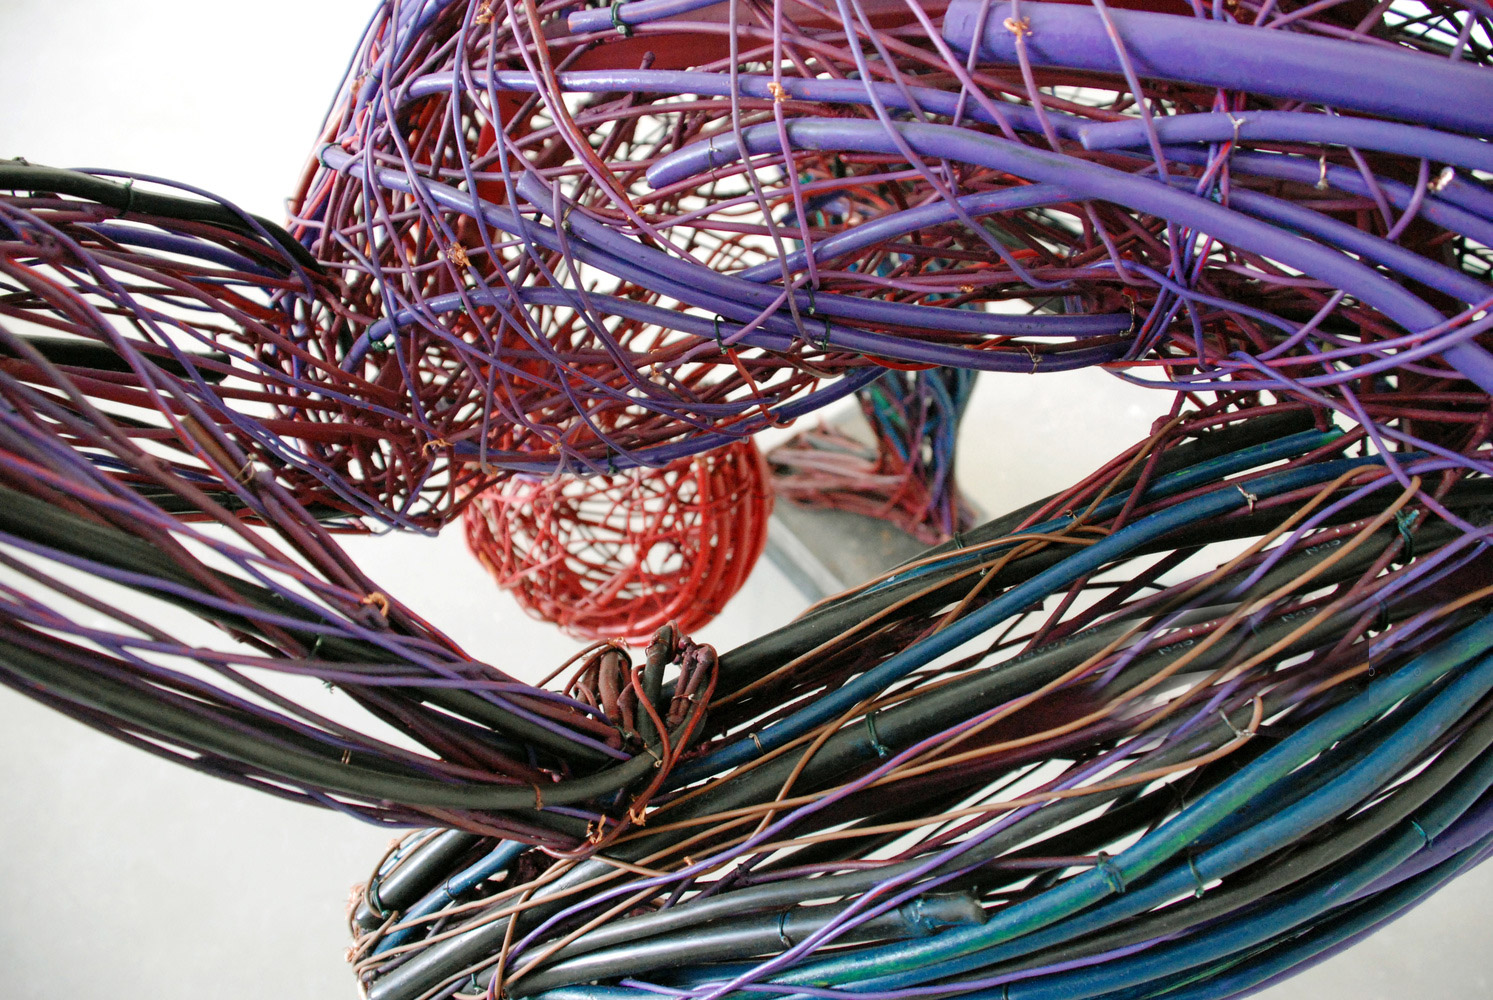 electric-cable-sculptures-judit raboczky-06